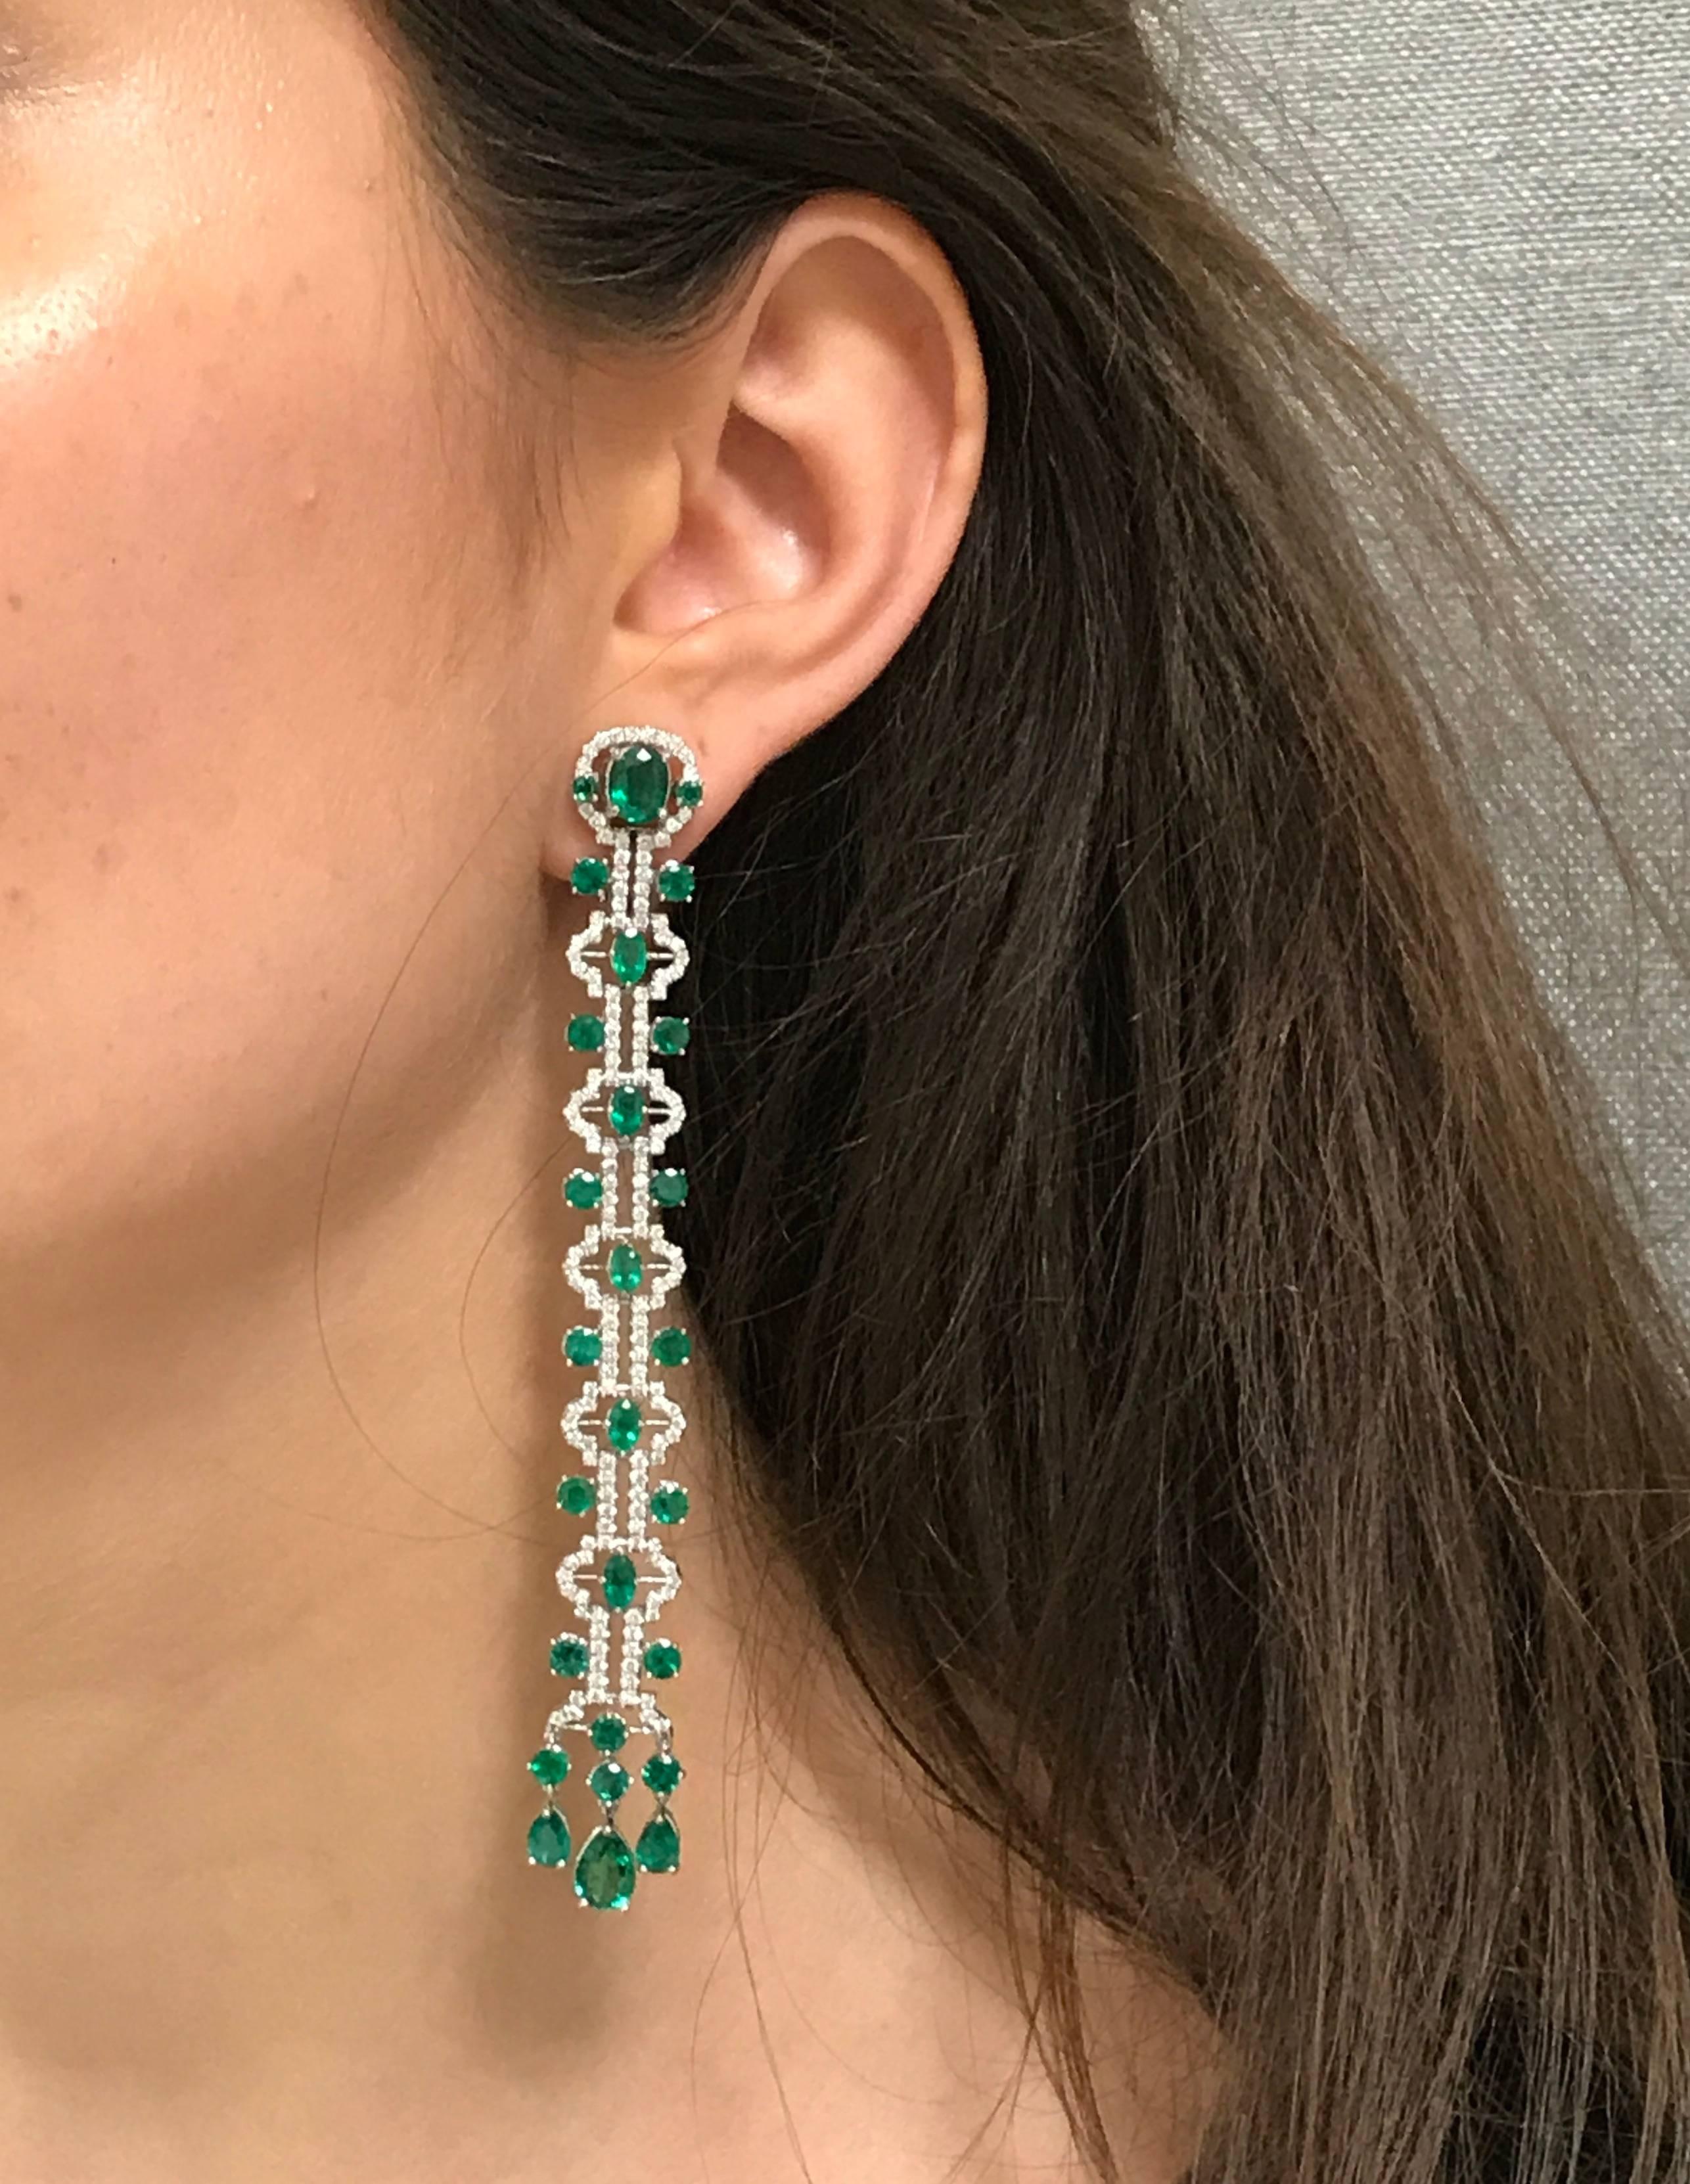 A pair of Line earrings with Beautiful Green Emeralds and pave Diamonds. Handcrafted in 18k white gold and suspended from a hidden post and omega back, these earrings feature 2.45 carats of pave Diamonds and 13.30 carats of Natural Green Emeralds.